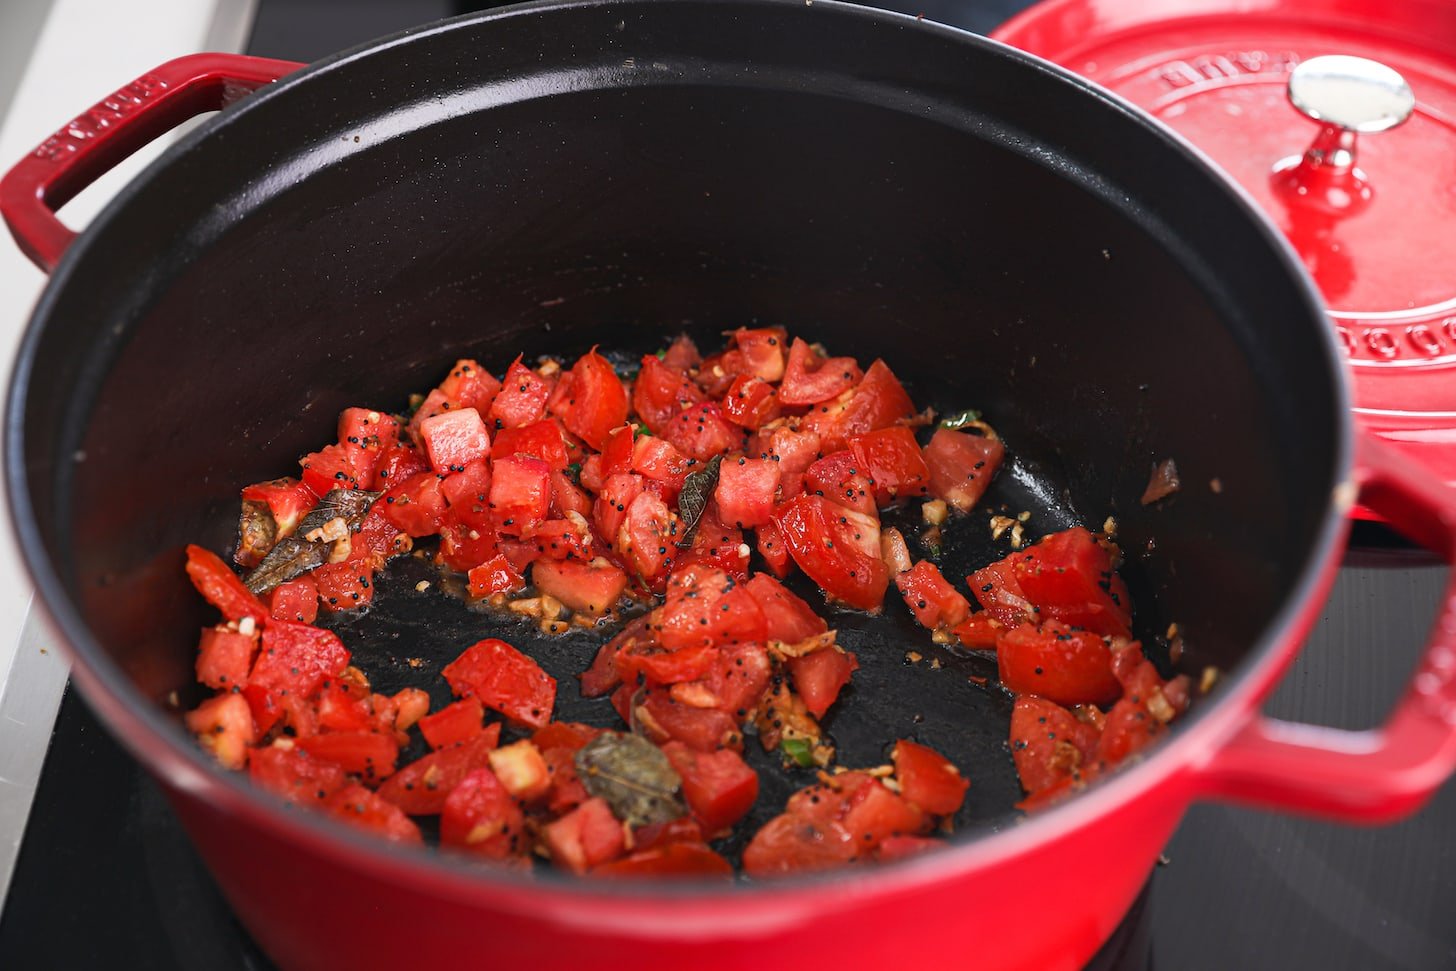 a red pot of chopped tomato with tiny black seeds and brown leaves.